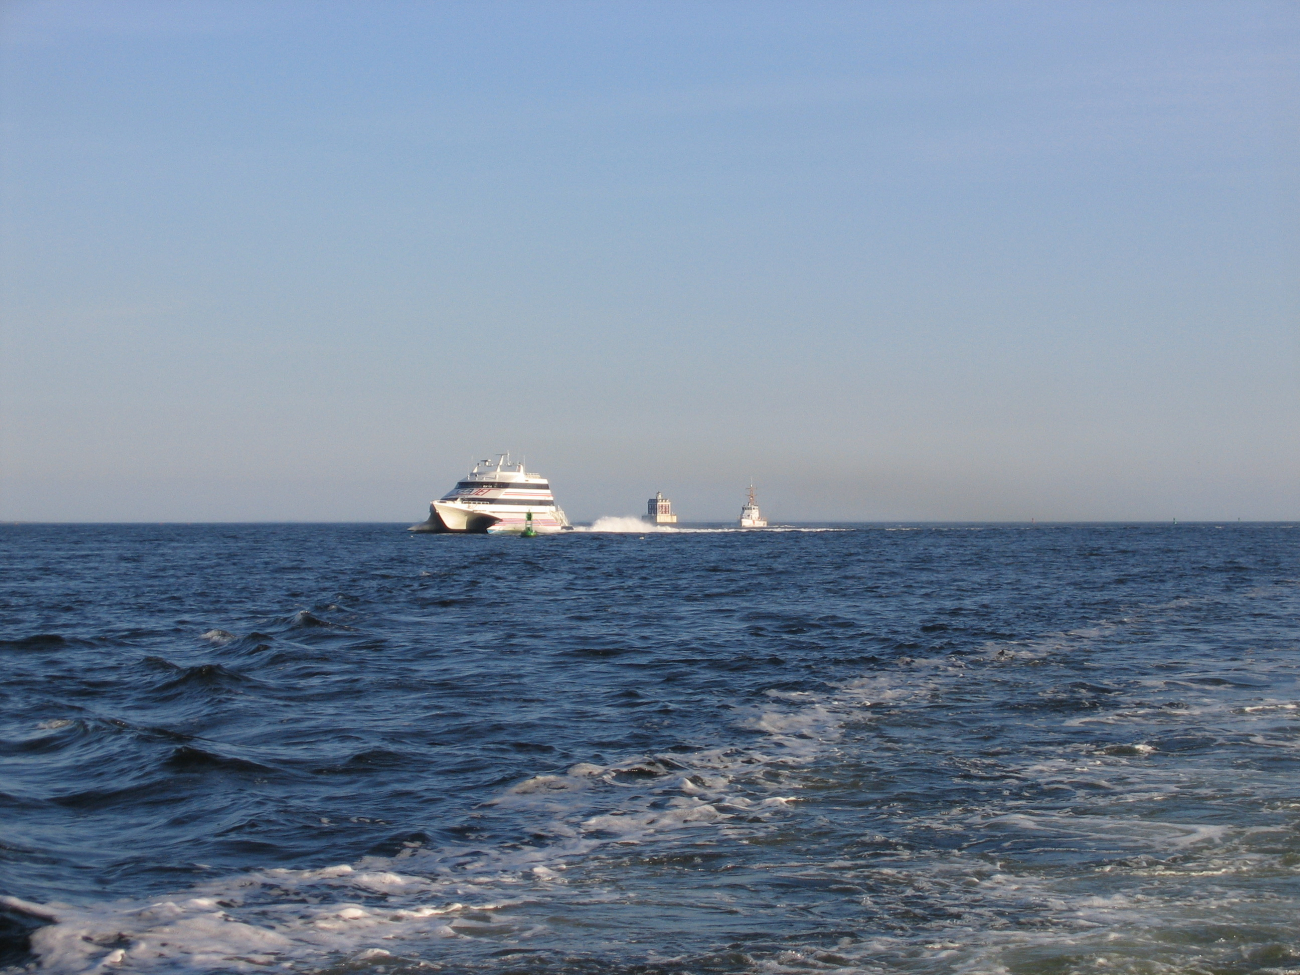 Sea Jet I, the Foxwoods ferry running past the New London Ledge Lighthouse